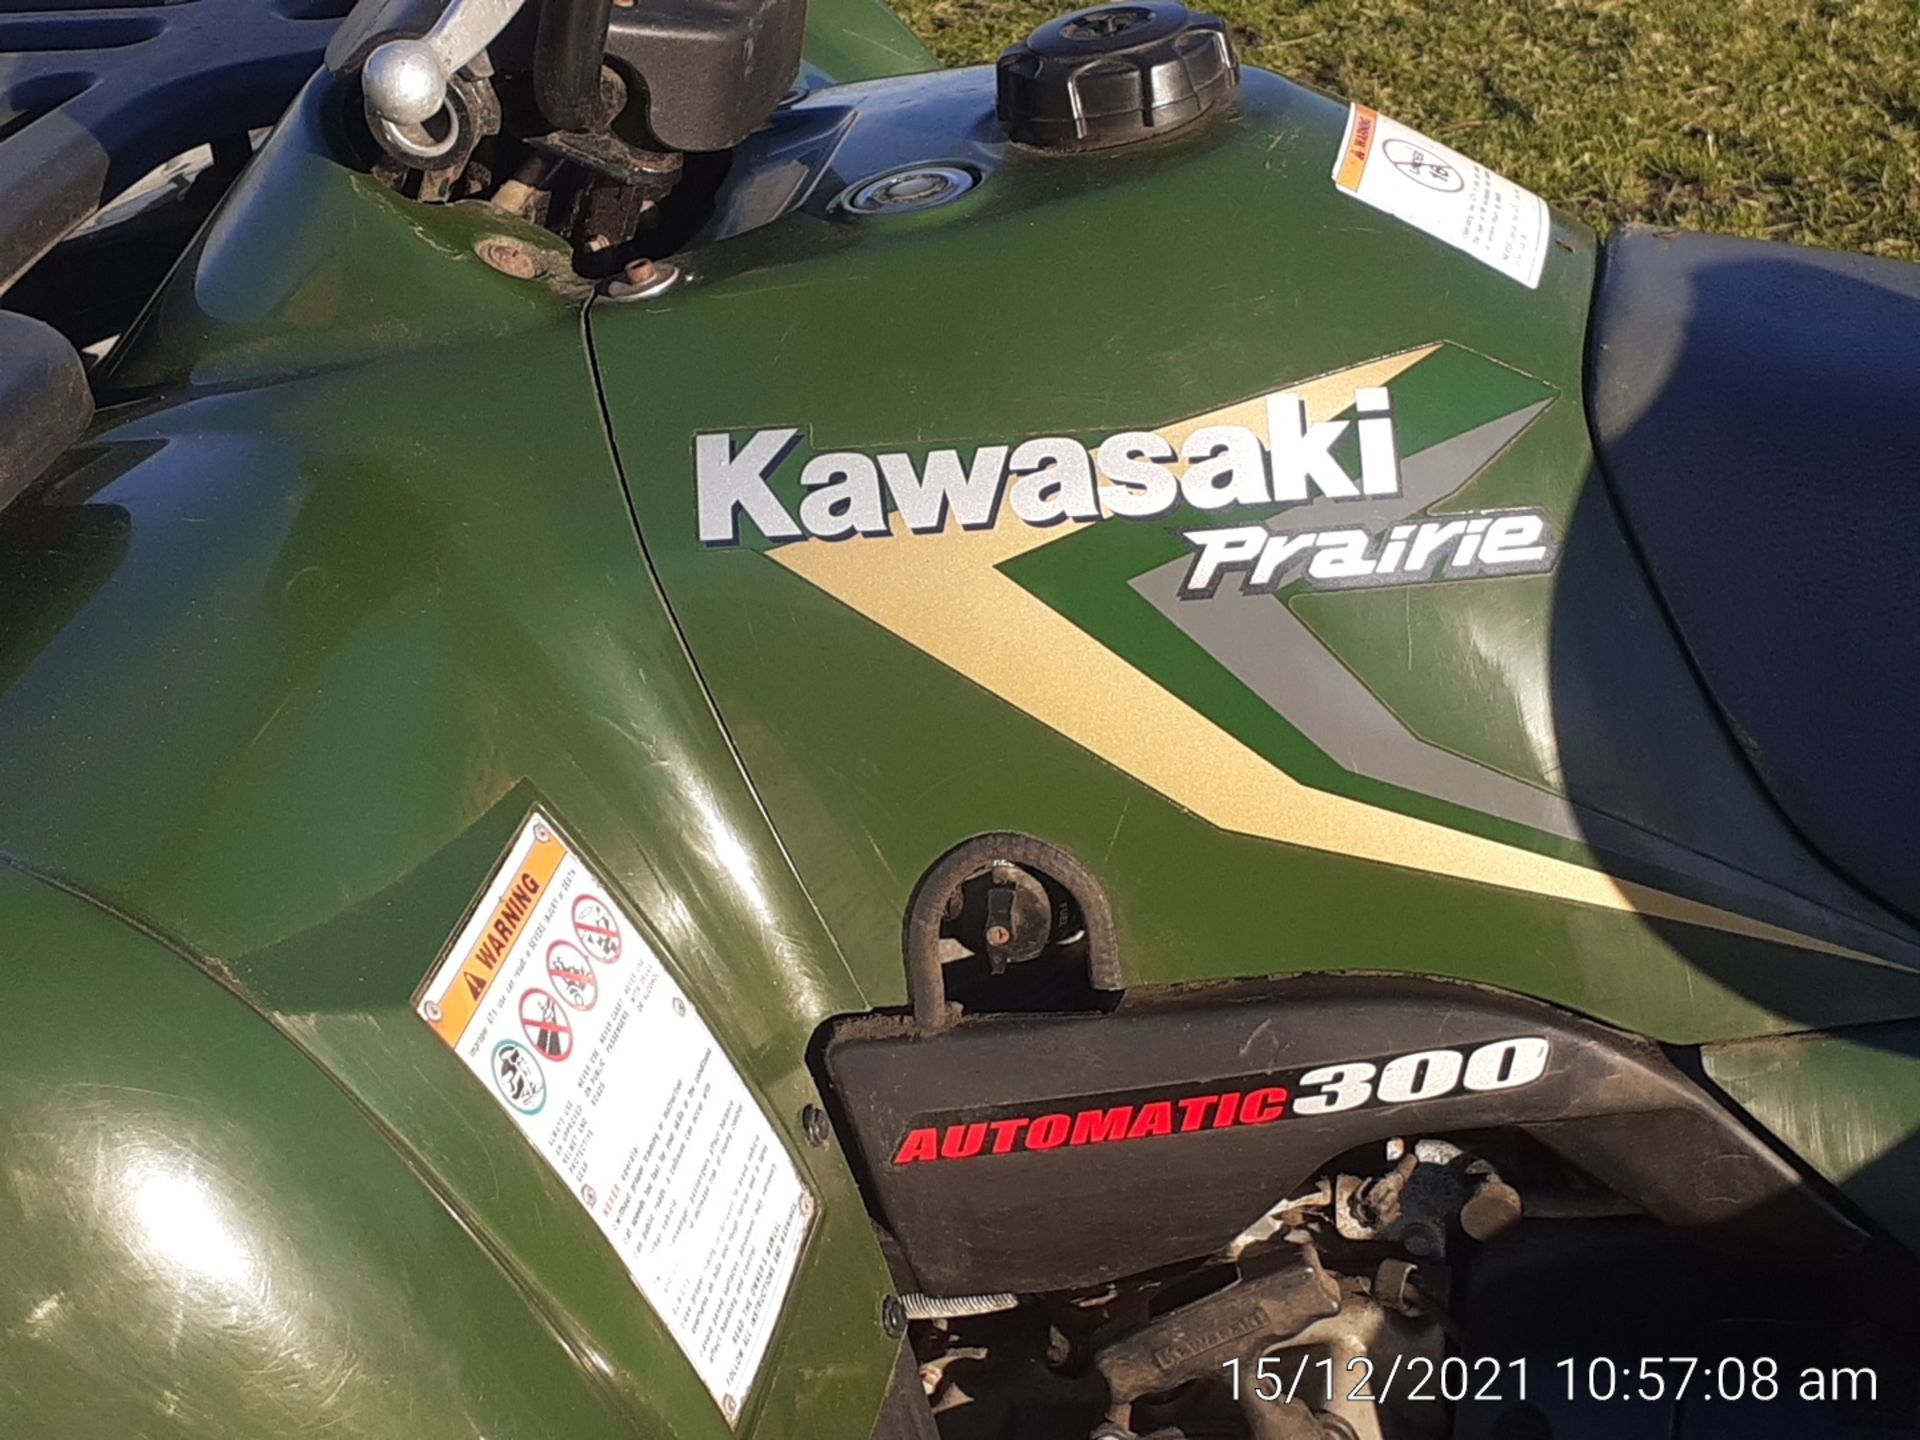 KAWASAKI PRAIRIE 300 4x4 QUAD BIKE, TOW BALL HITCH, FULL TIME 4WD, 1 OWNER FROM NEW *NO VAT* - Image 7 of 7